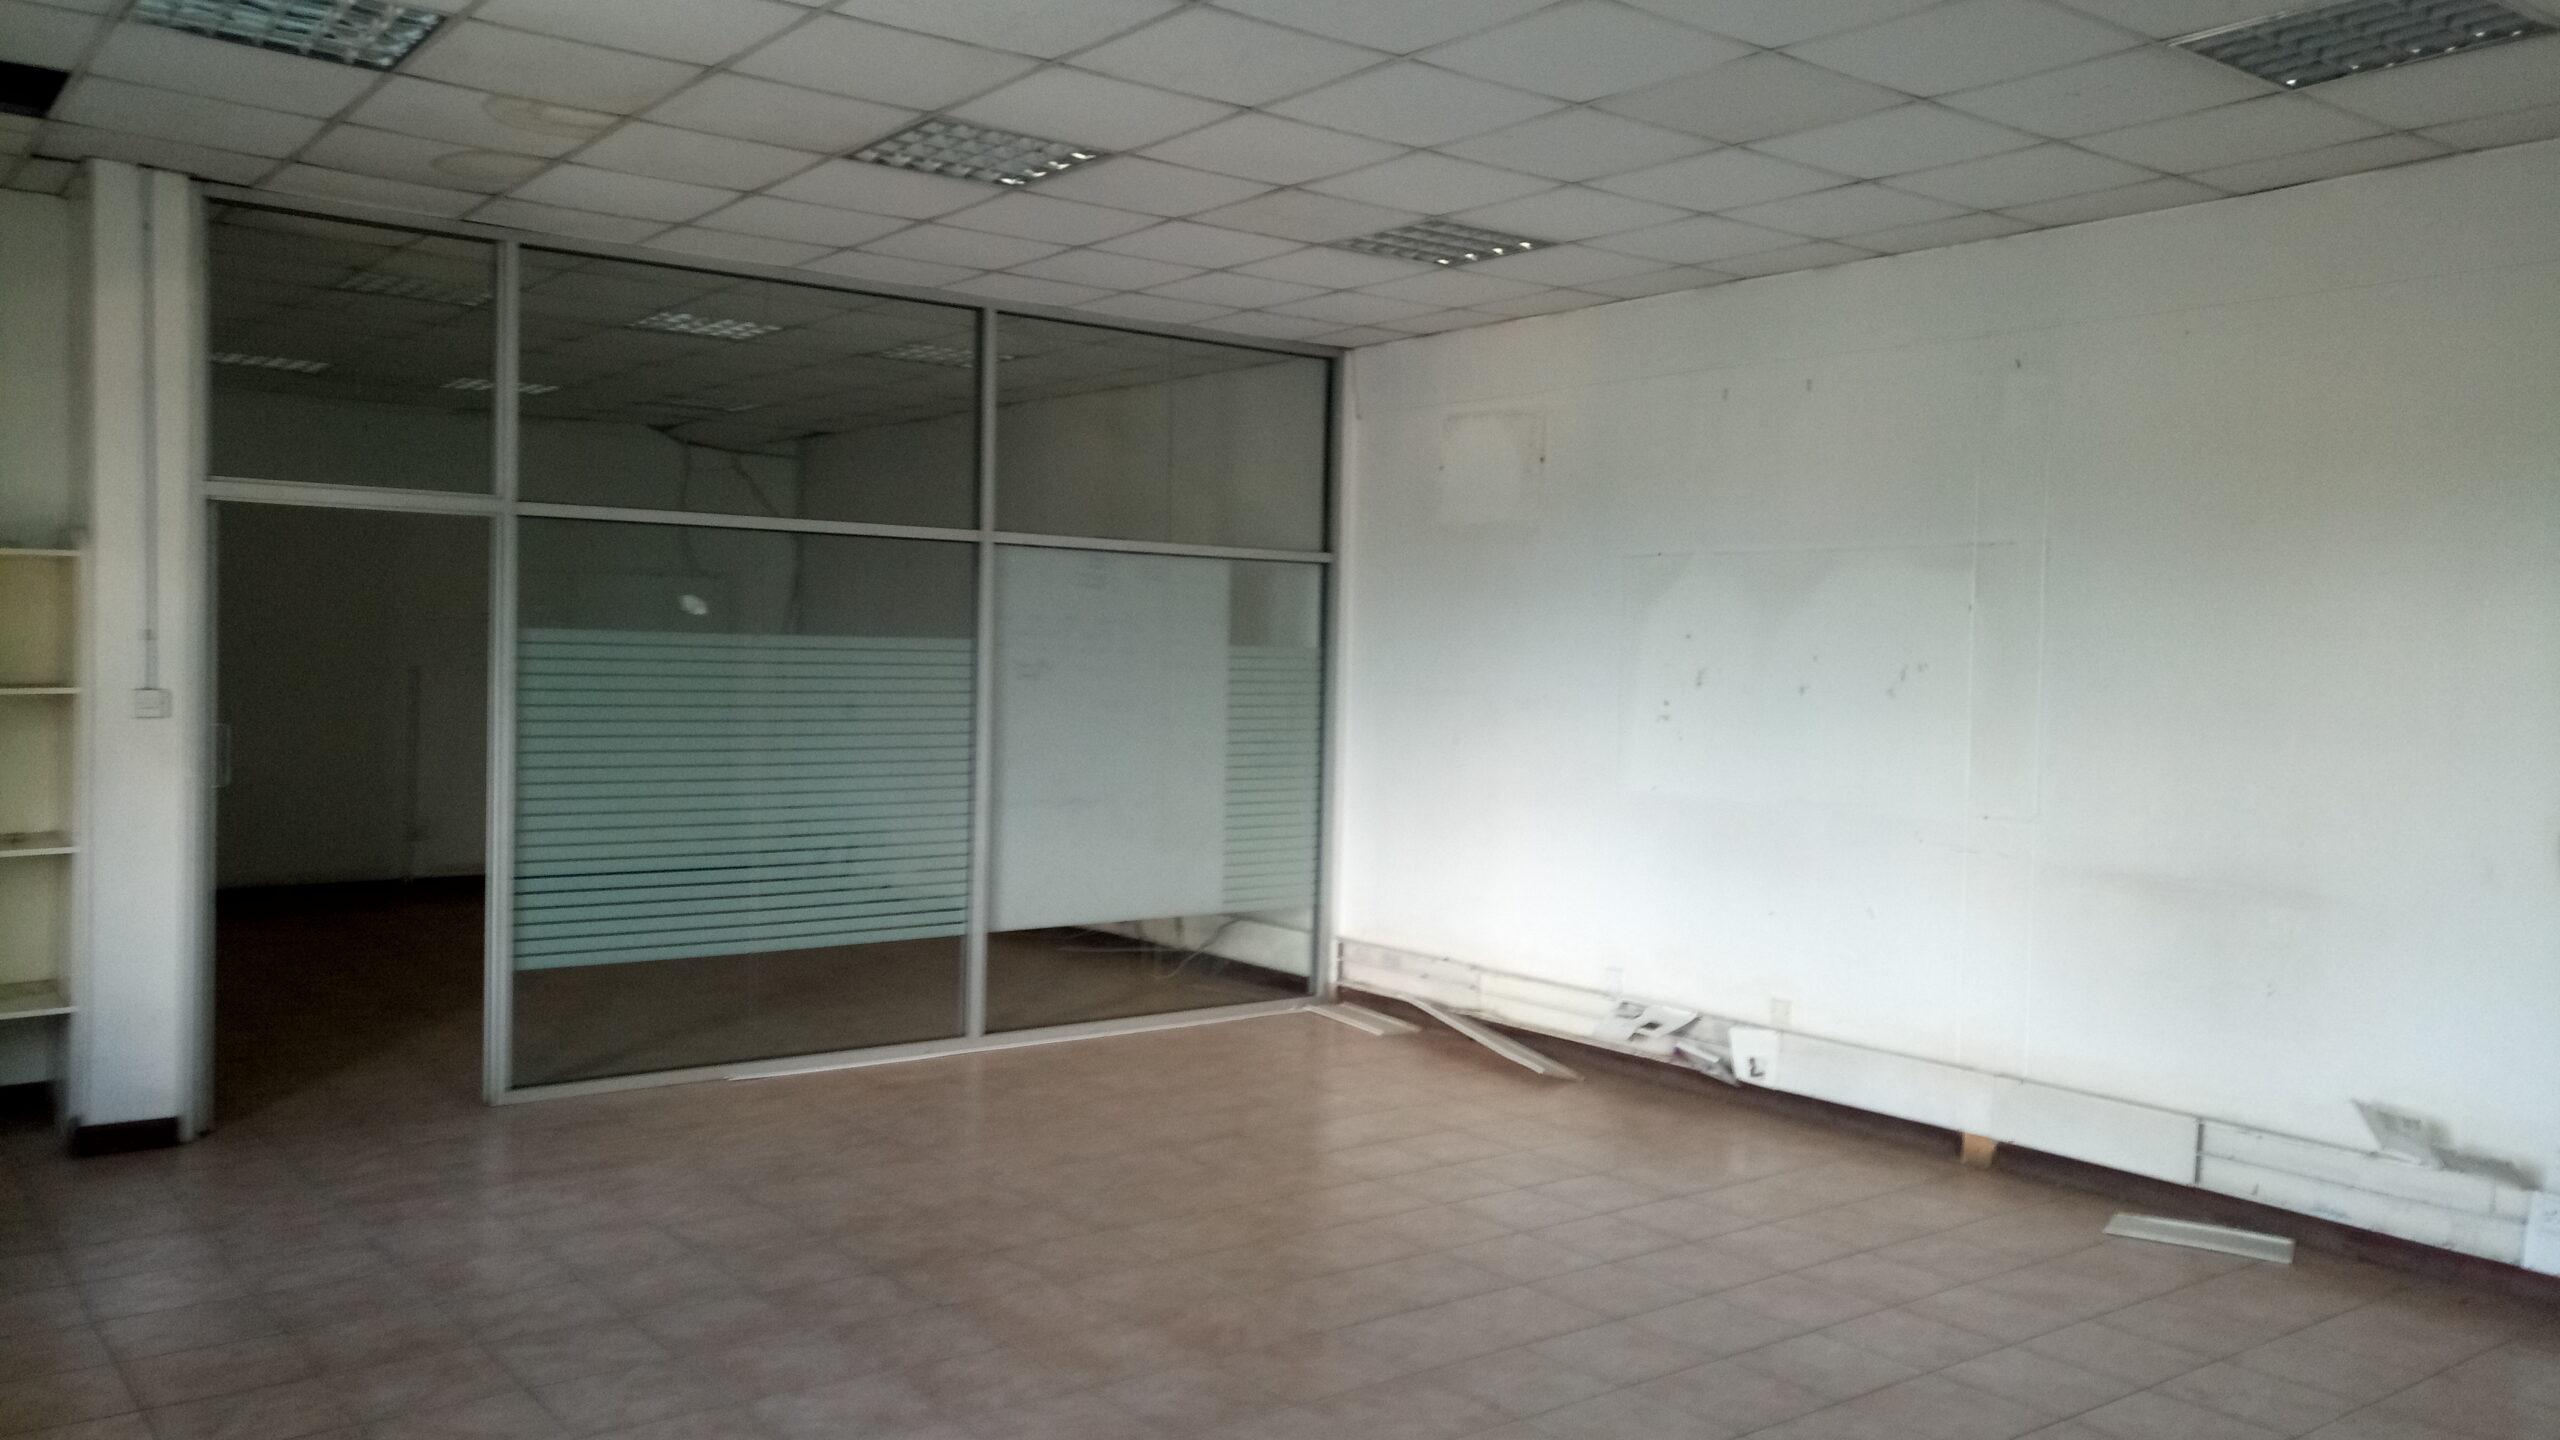 21 03013 RO Contemporary office setting ideal for Non Governmental organizations, professional offices or otherwise along Langata Road. 20 07 30